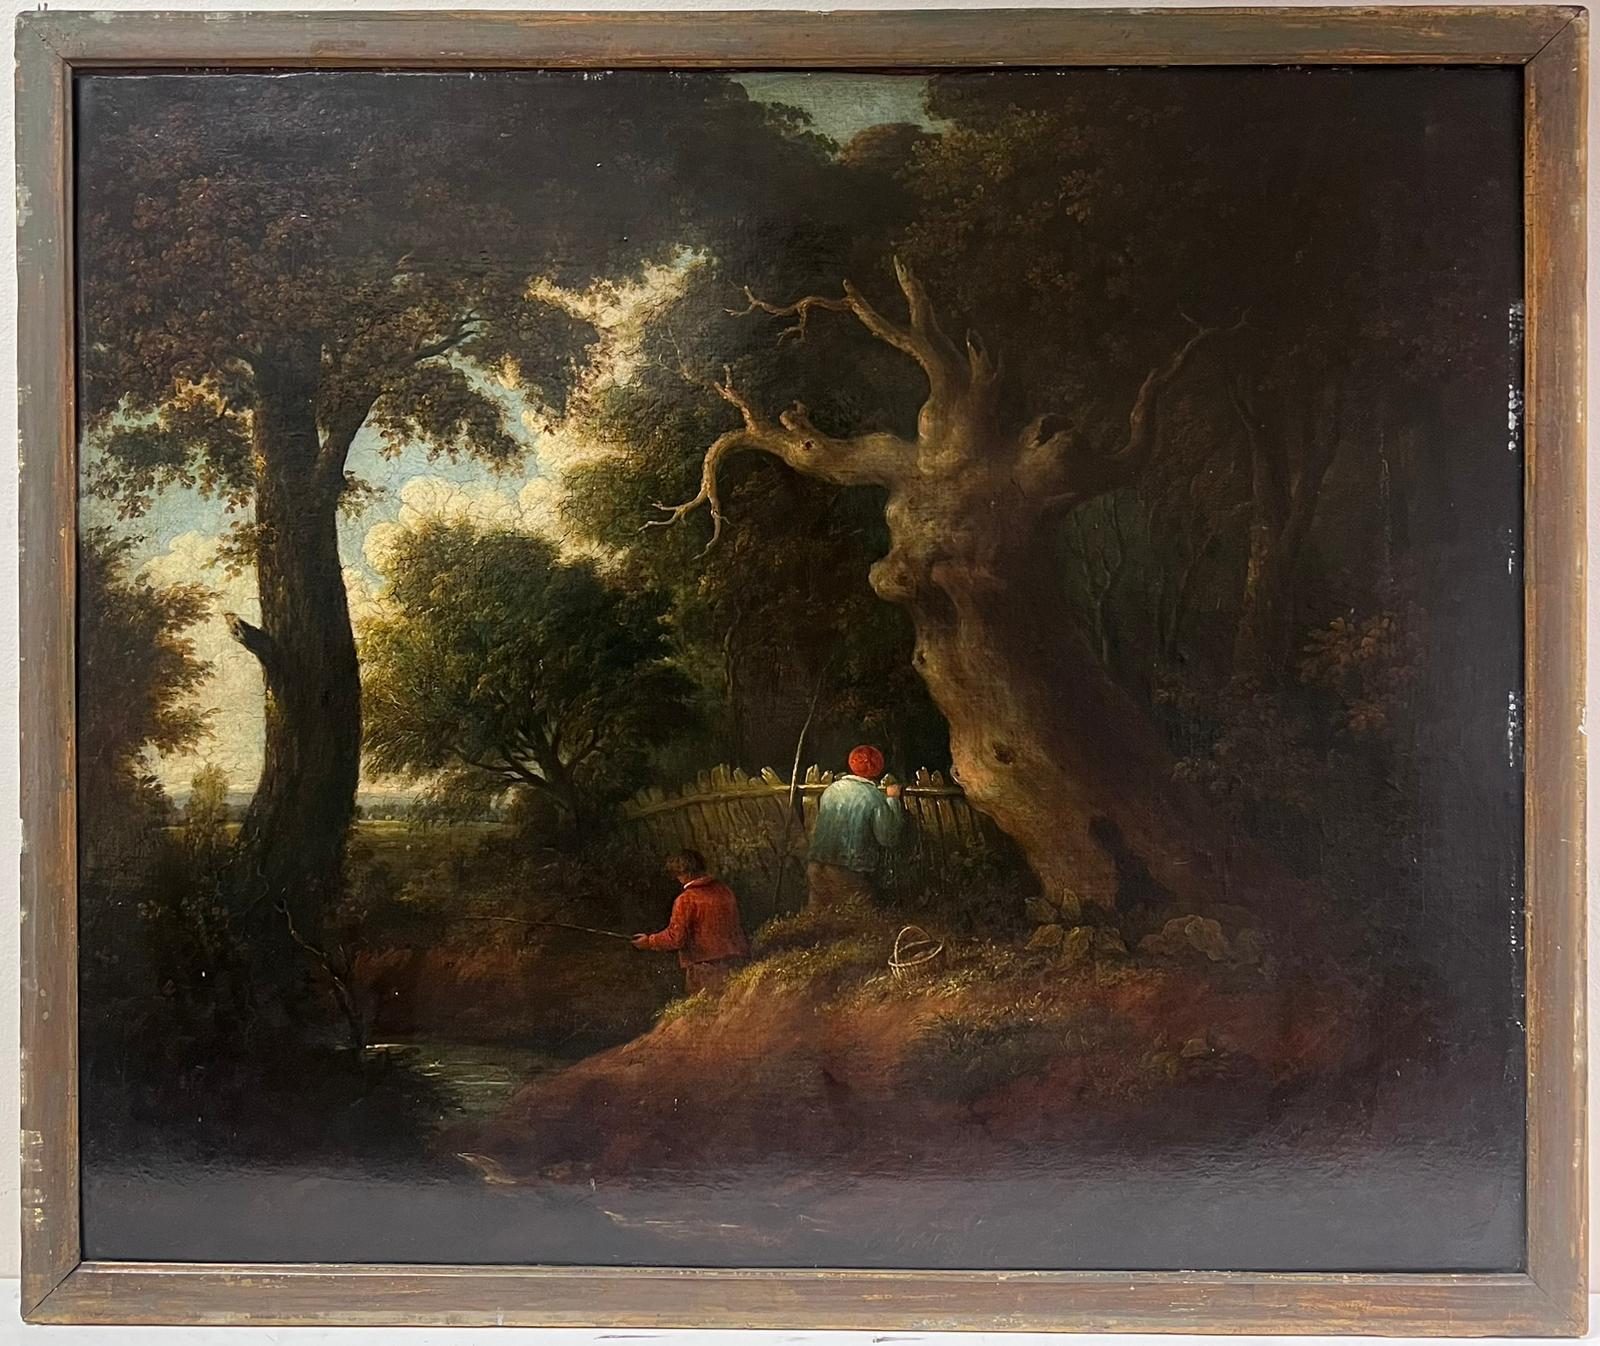 Fishing the Woodland Pool
English School, very early 1800's
circle of George Morland *see notes below
oil on board, framed
framed: 27 x 31.5 inches
board : 25 x 30 inches
provenance: private collection, England
condition: some frame rubbing to the